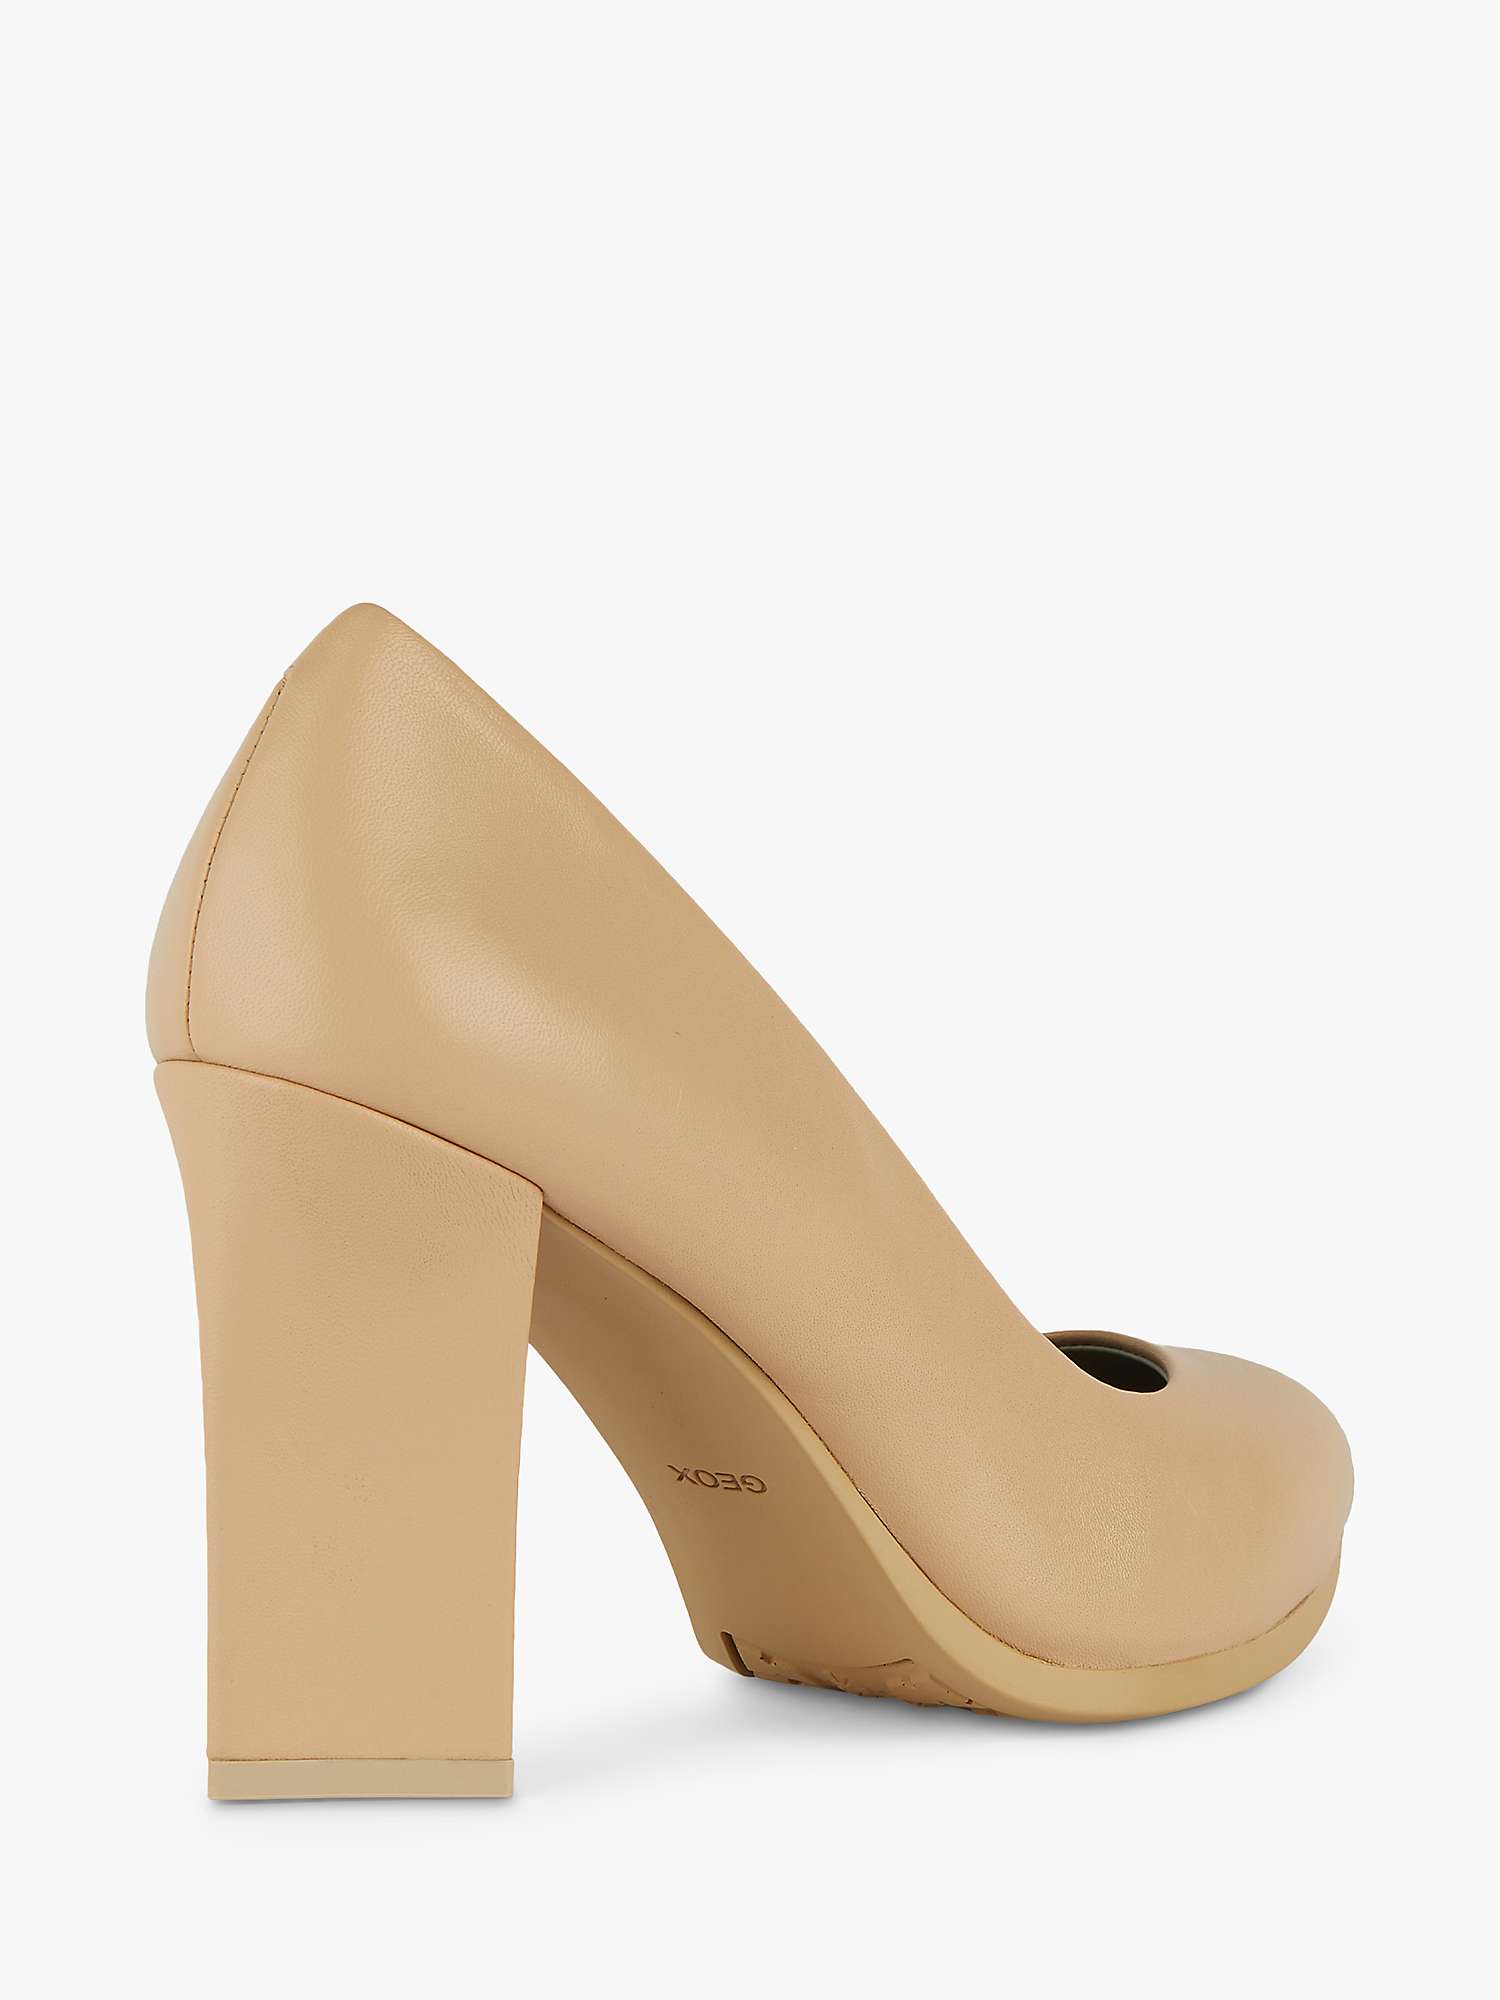 Buy Geox Walk Pleasure 90.1 Leather Triangle Heel Court Shoes, Nude Online at johnlewis.com